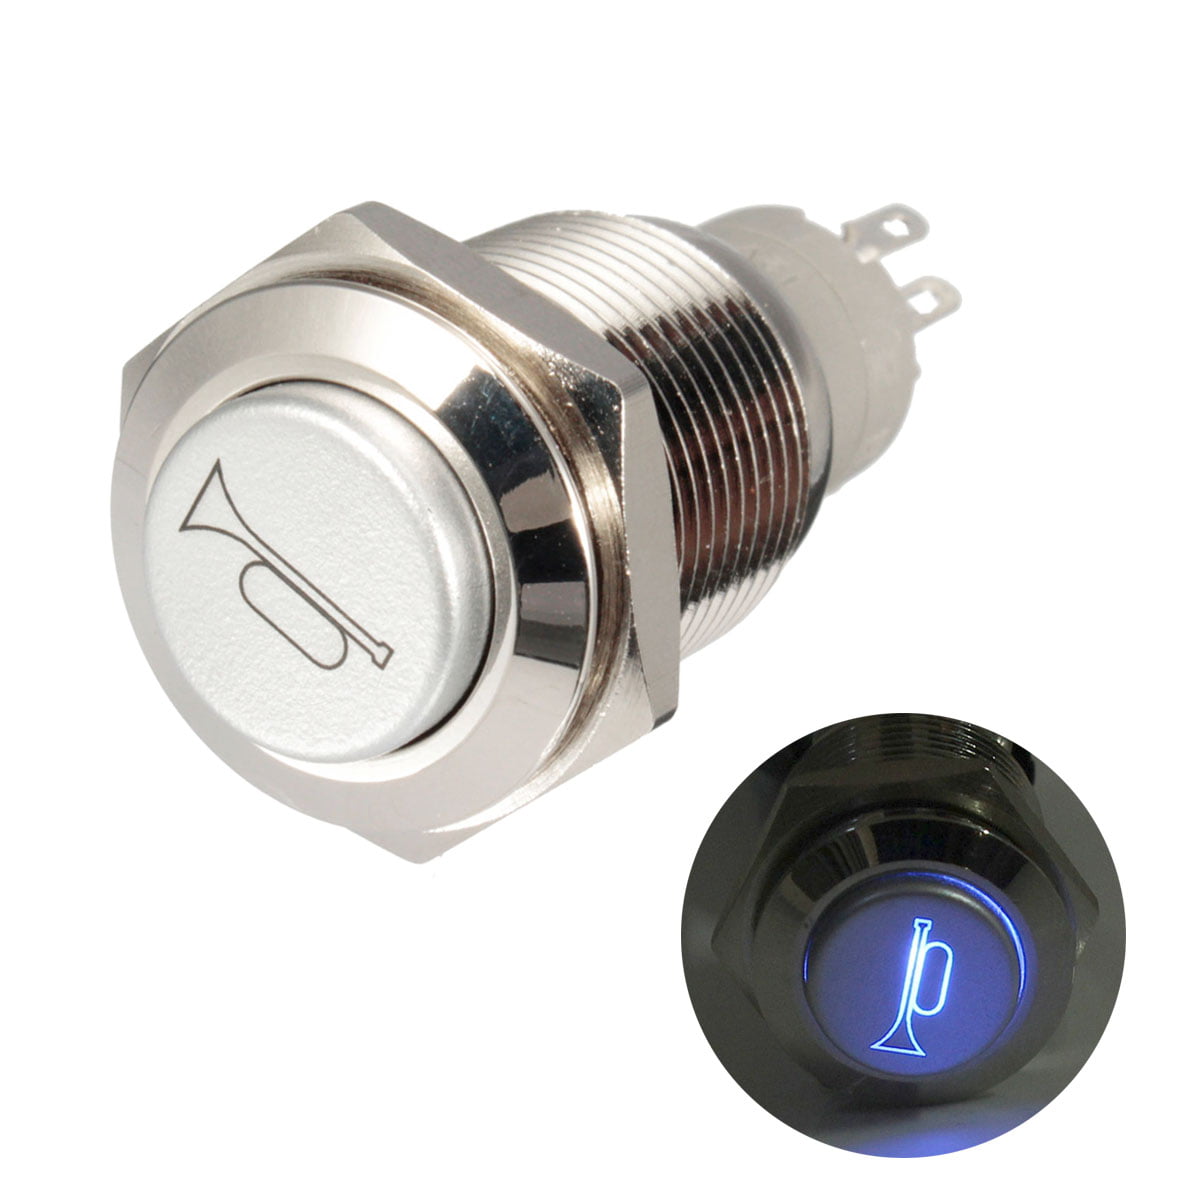 Viping Car Horn Button Switch momentary Push Button Switch 12V 16mm LED On/Off Switch Reset Switch Button Metal momentary Speaker Horn Switch Power Metal Toggle Switch Car Boat Motorcycle DIY Switch